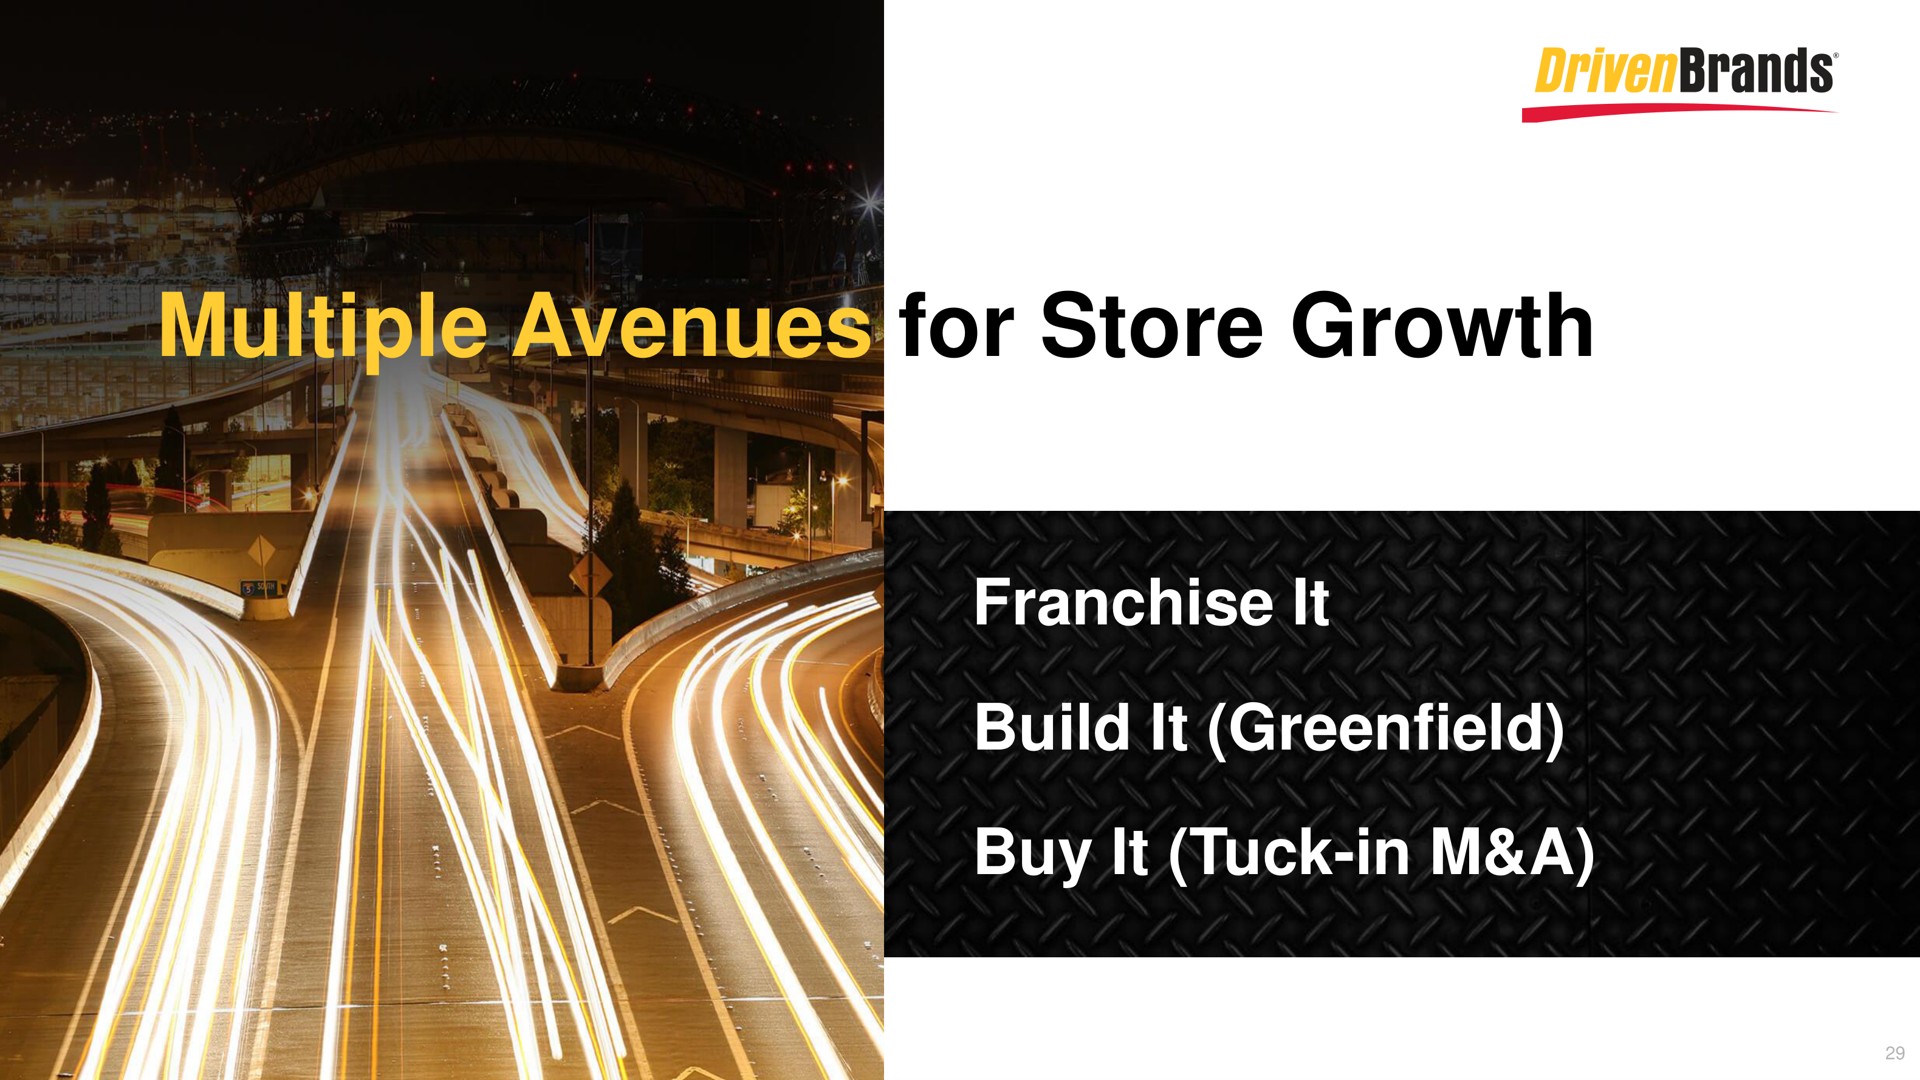 multiple avenues for store growth franchise it build it buy it tuck in a in | DrivenBrands